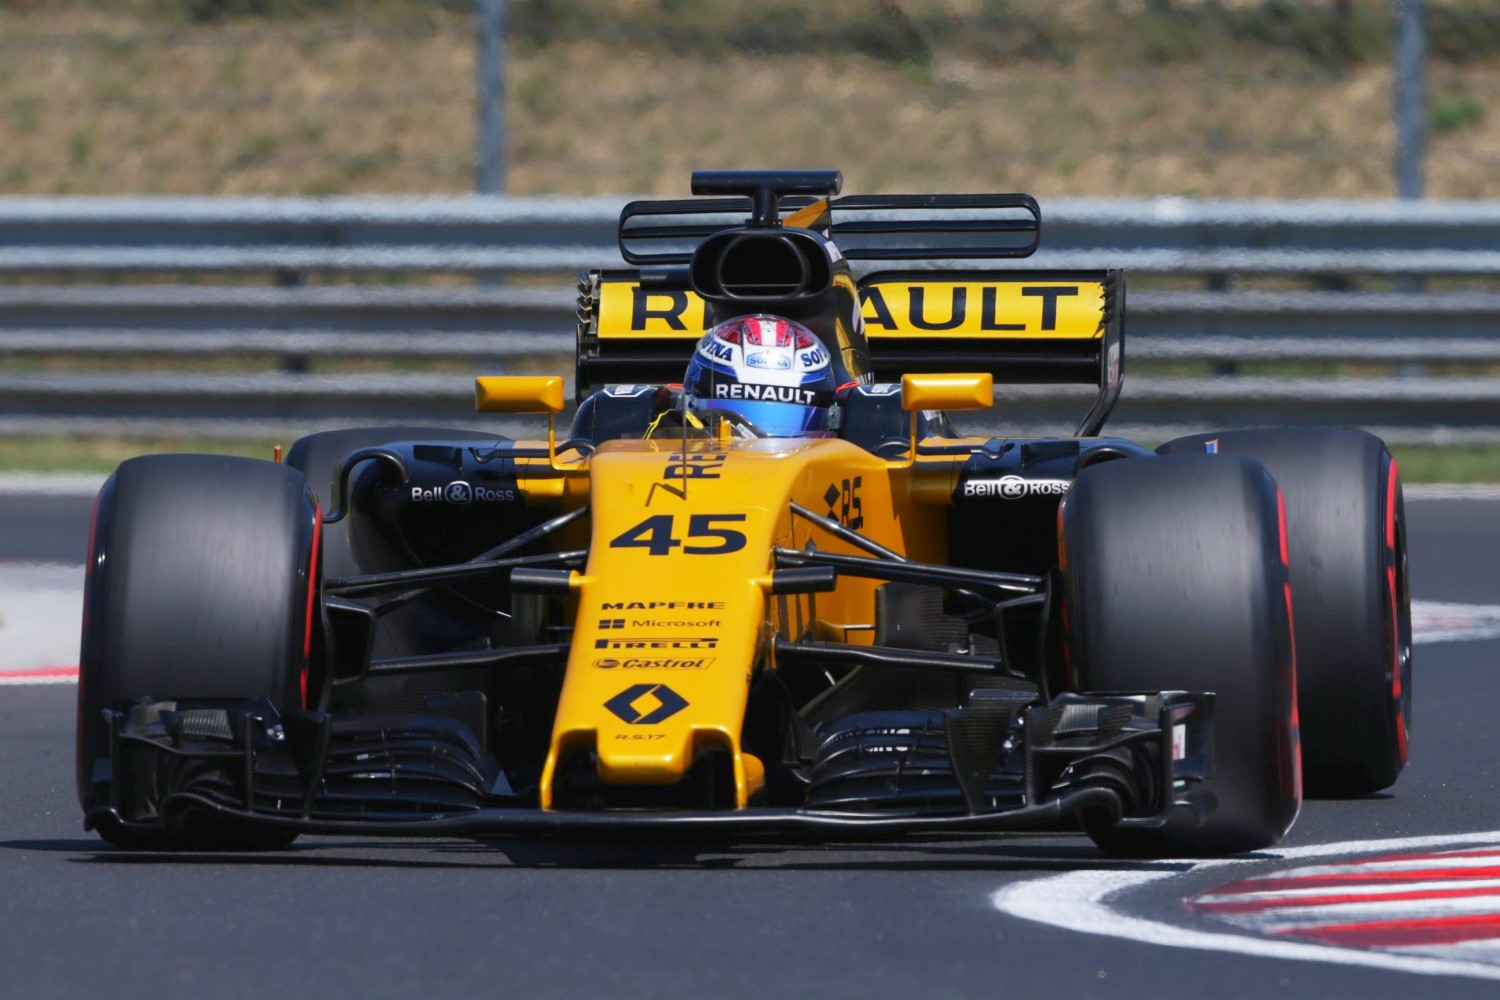 Kubica found that current F1 cars are a breeze to drive with globs of downforce to spare